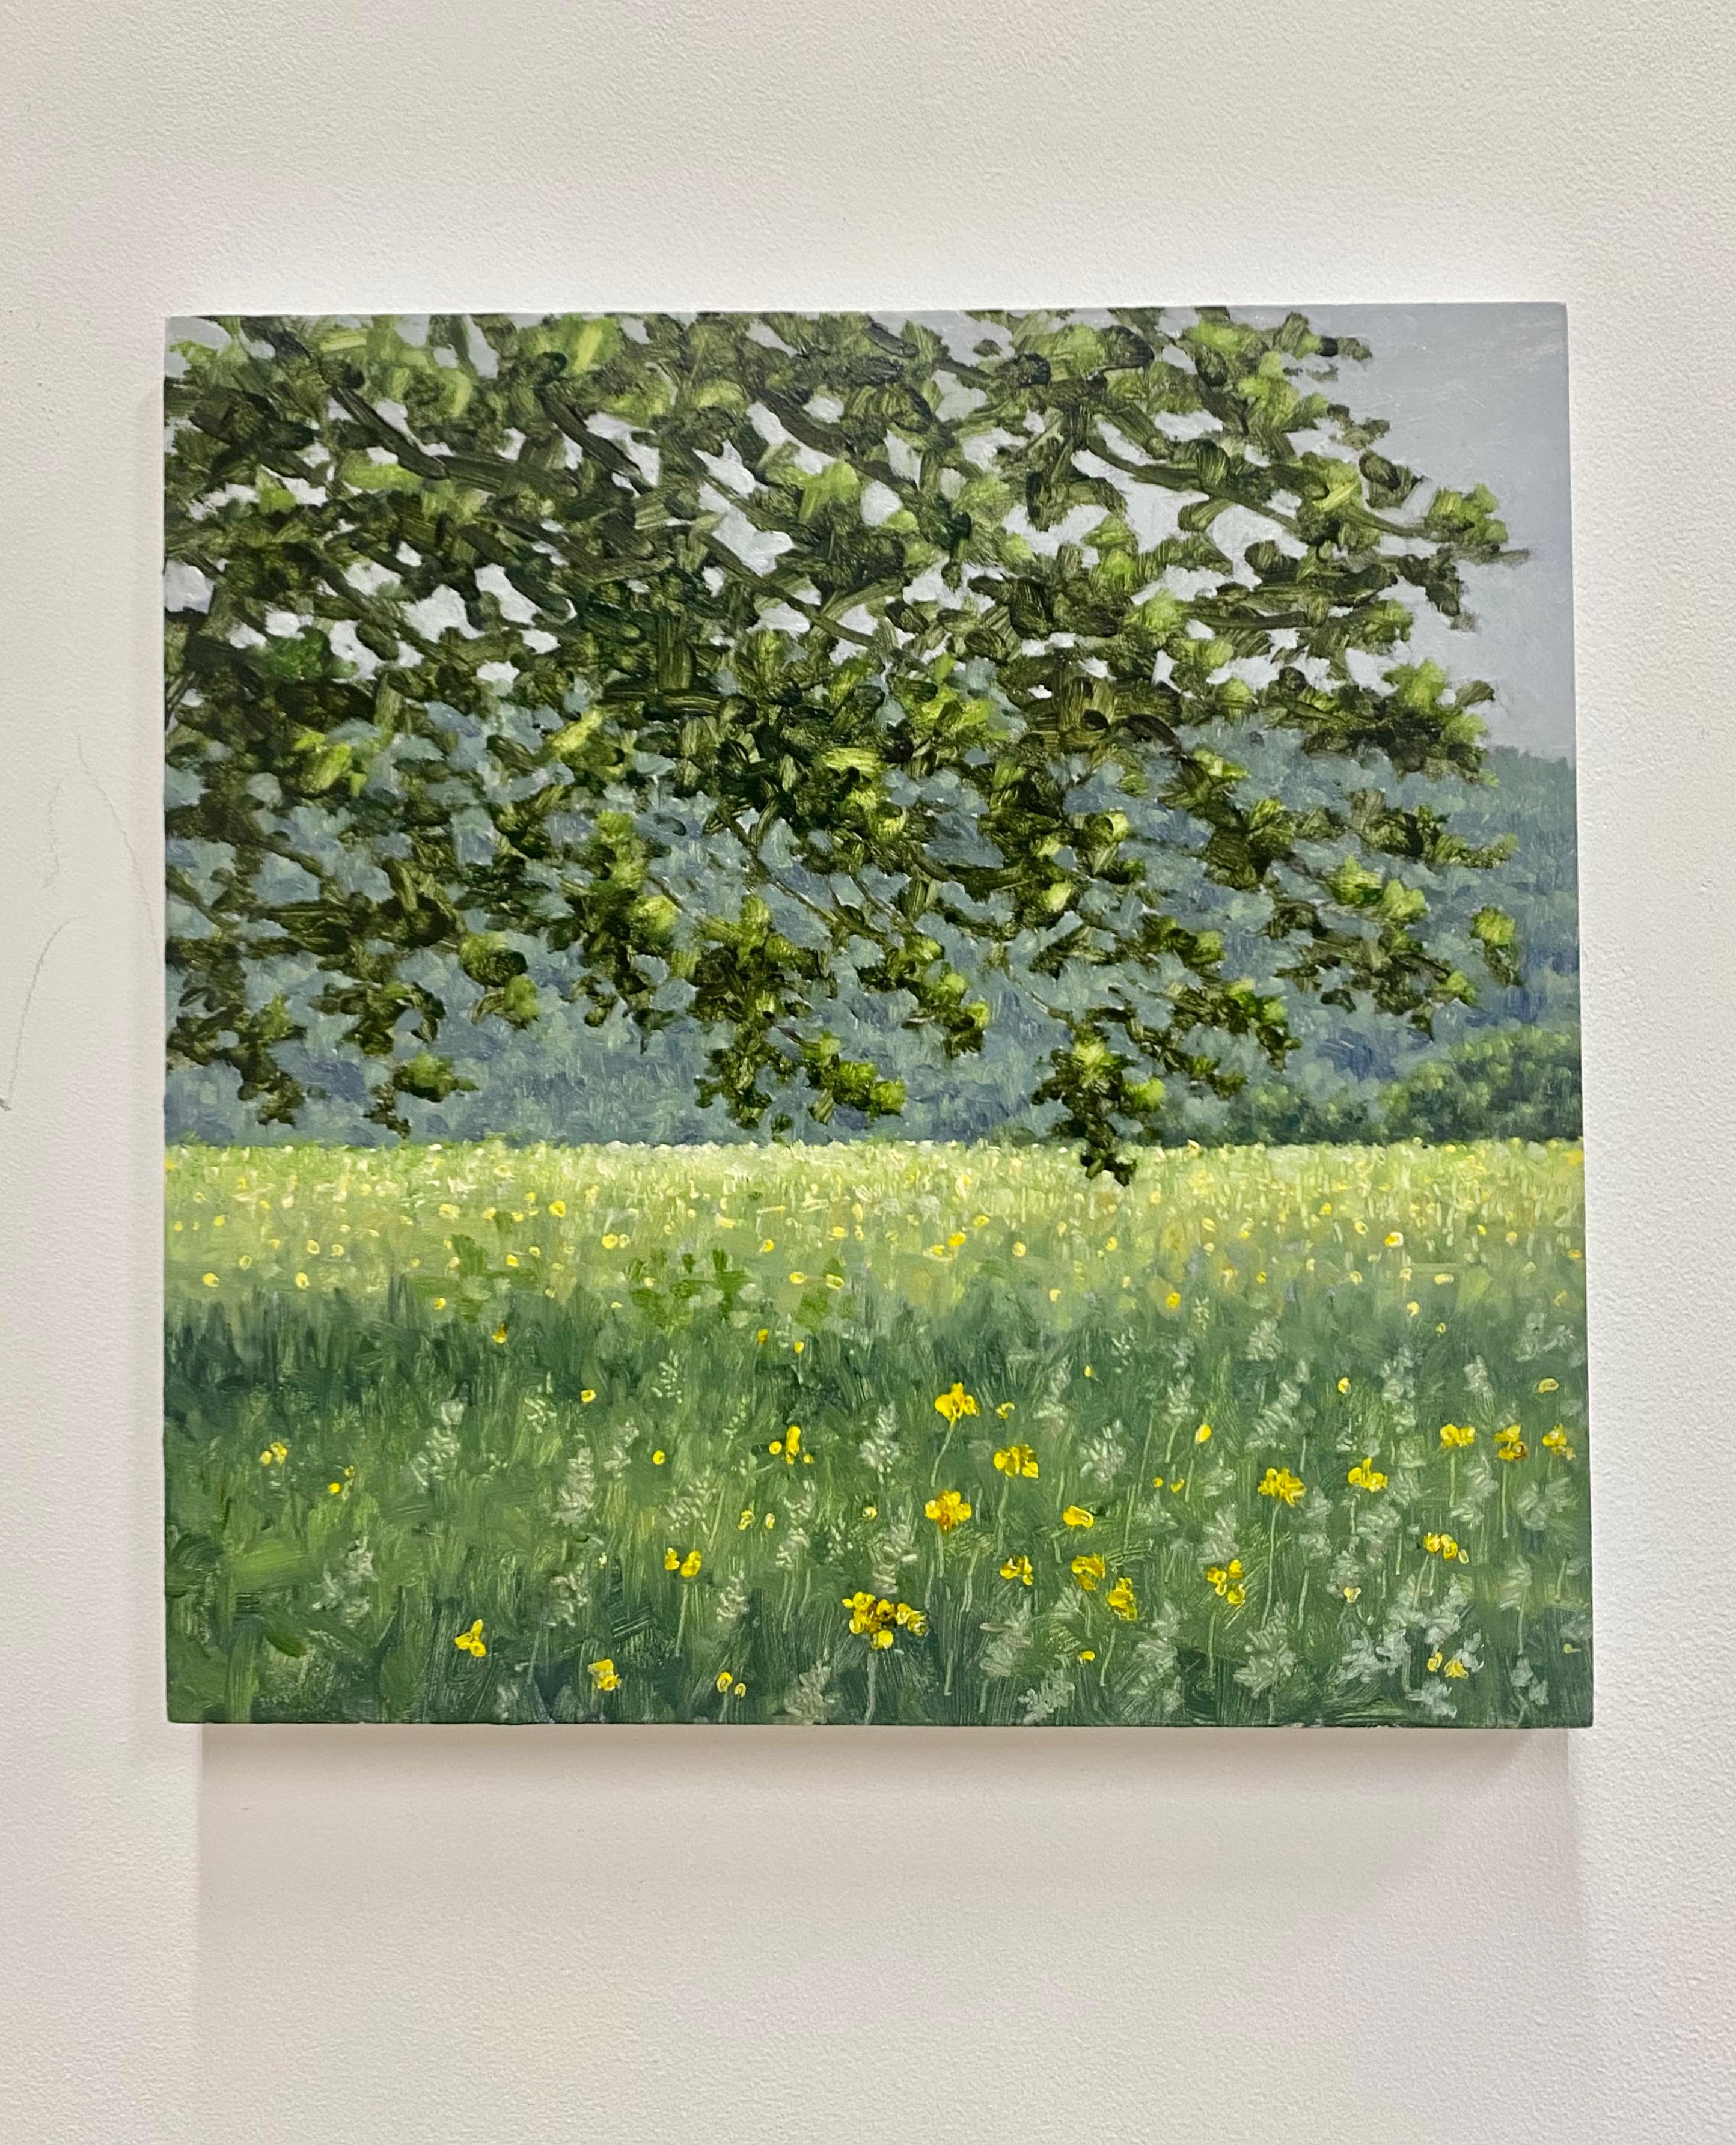 A peaceful outdoor scene with a grassy field with yellow flowers beneath a tree with dark green leaves, beautifully capturing the idyllic feel of early June. Signed, dated and titled on verso.

The paintings of Thomas Sarrantonio seek to mediate